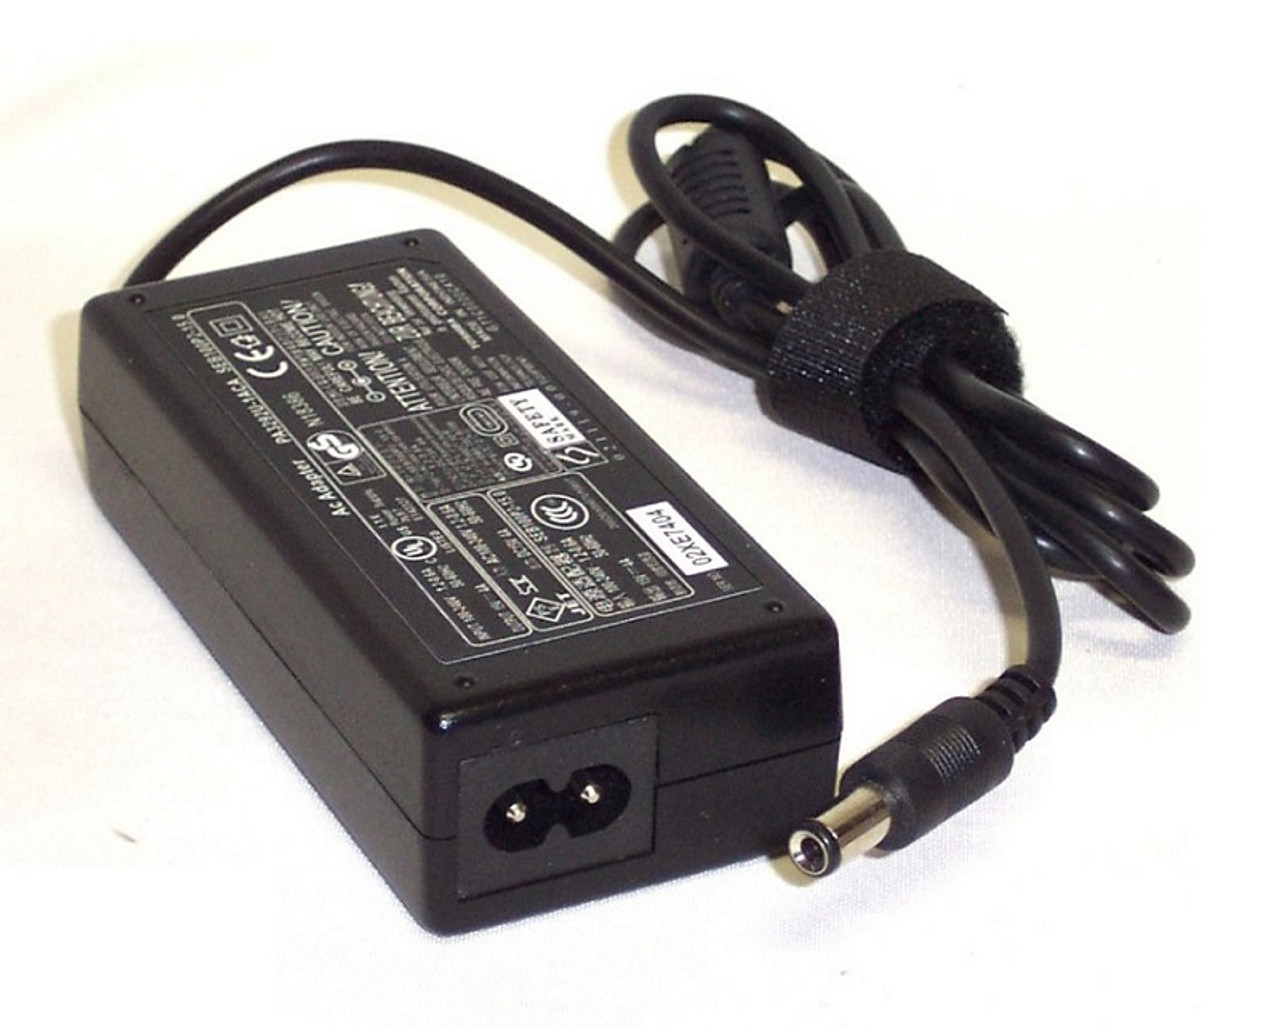 AD8027 - IBM 130-Watts 3-Pin USFF Power Adapter for ThinkCentre M58